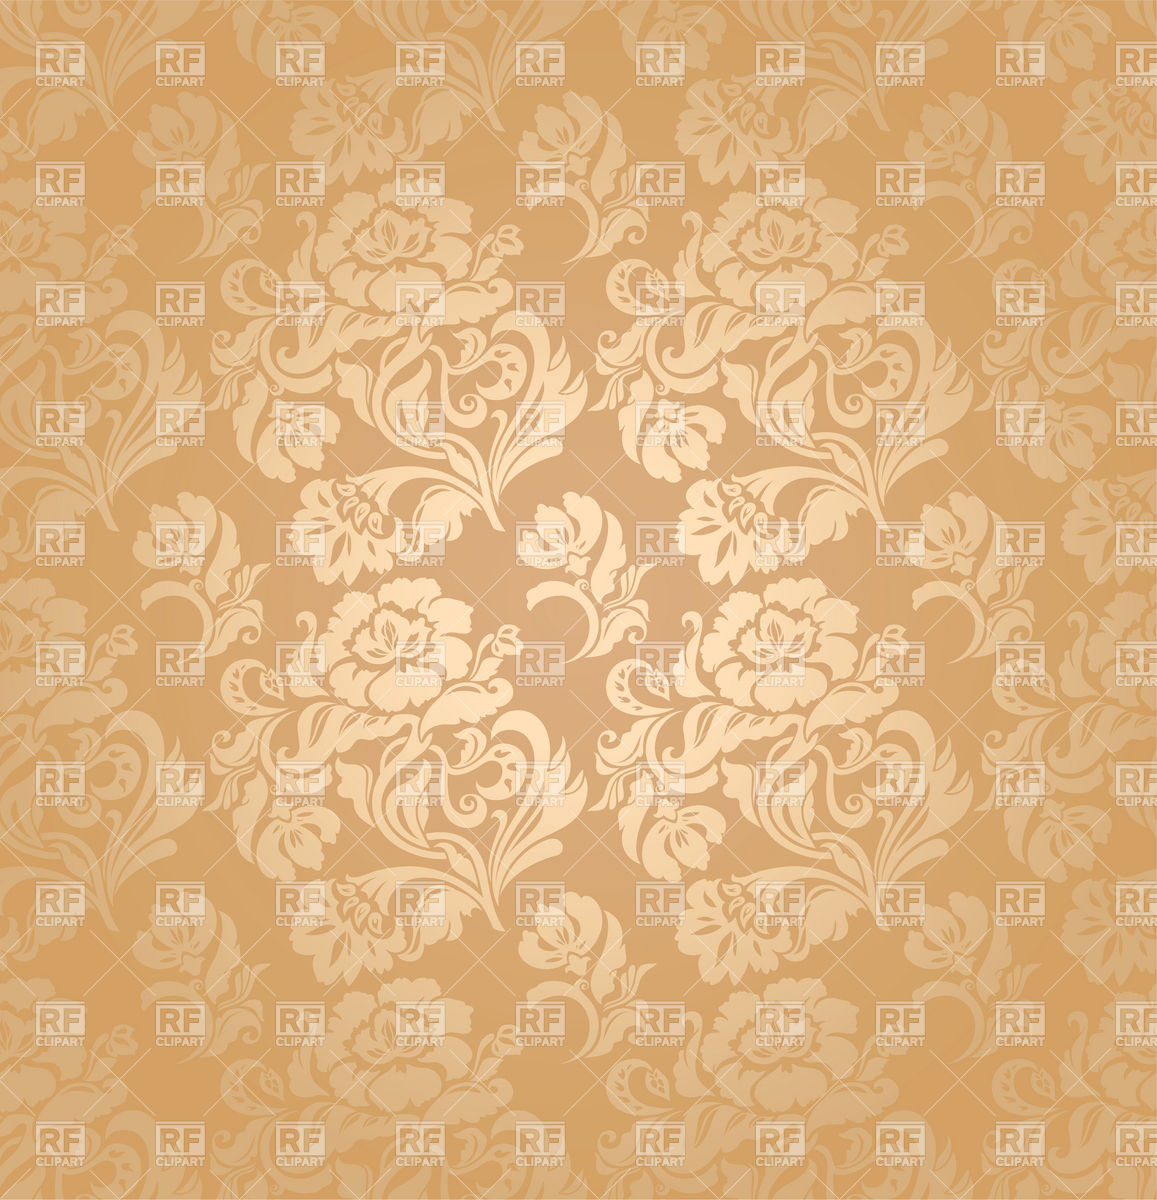 Beige Victorian Wallpaper With Floral Pattern Royalty